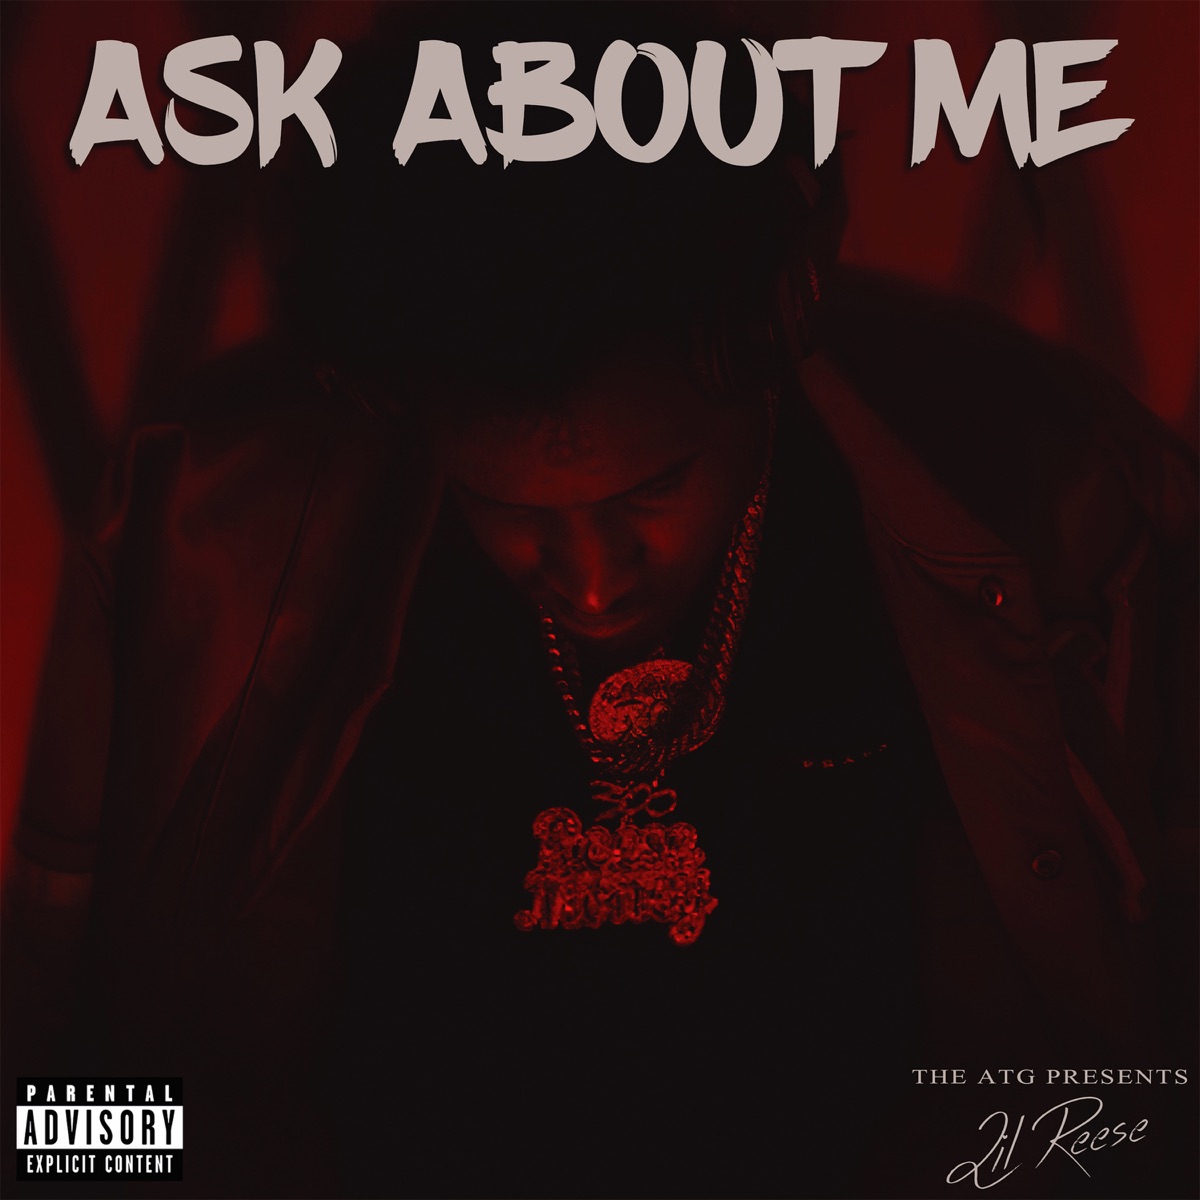 Lil Reese & ATG Productions – Ask About Me